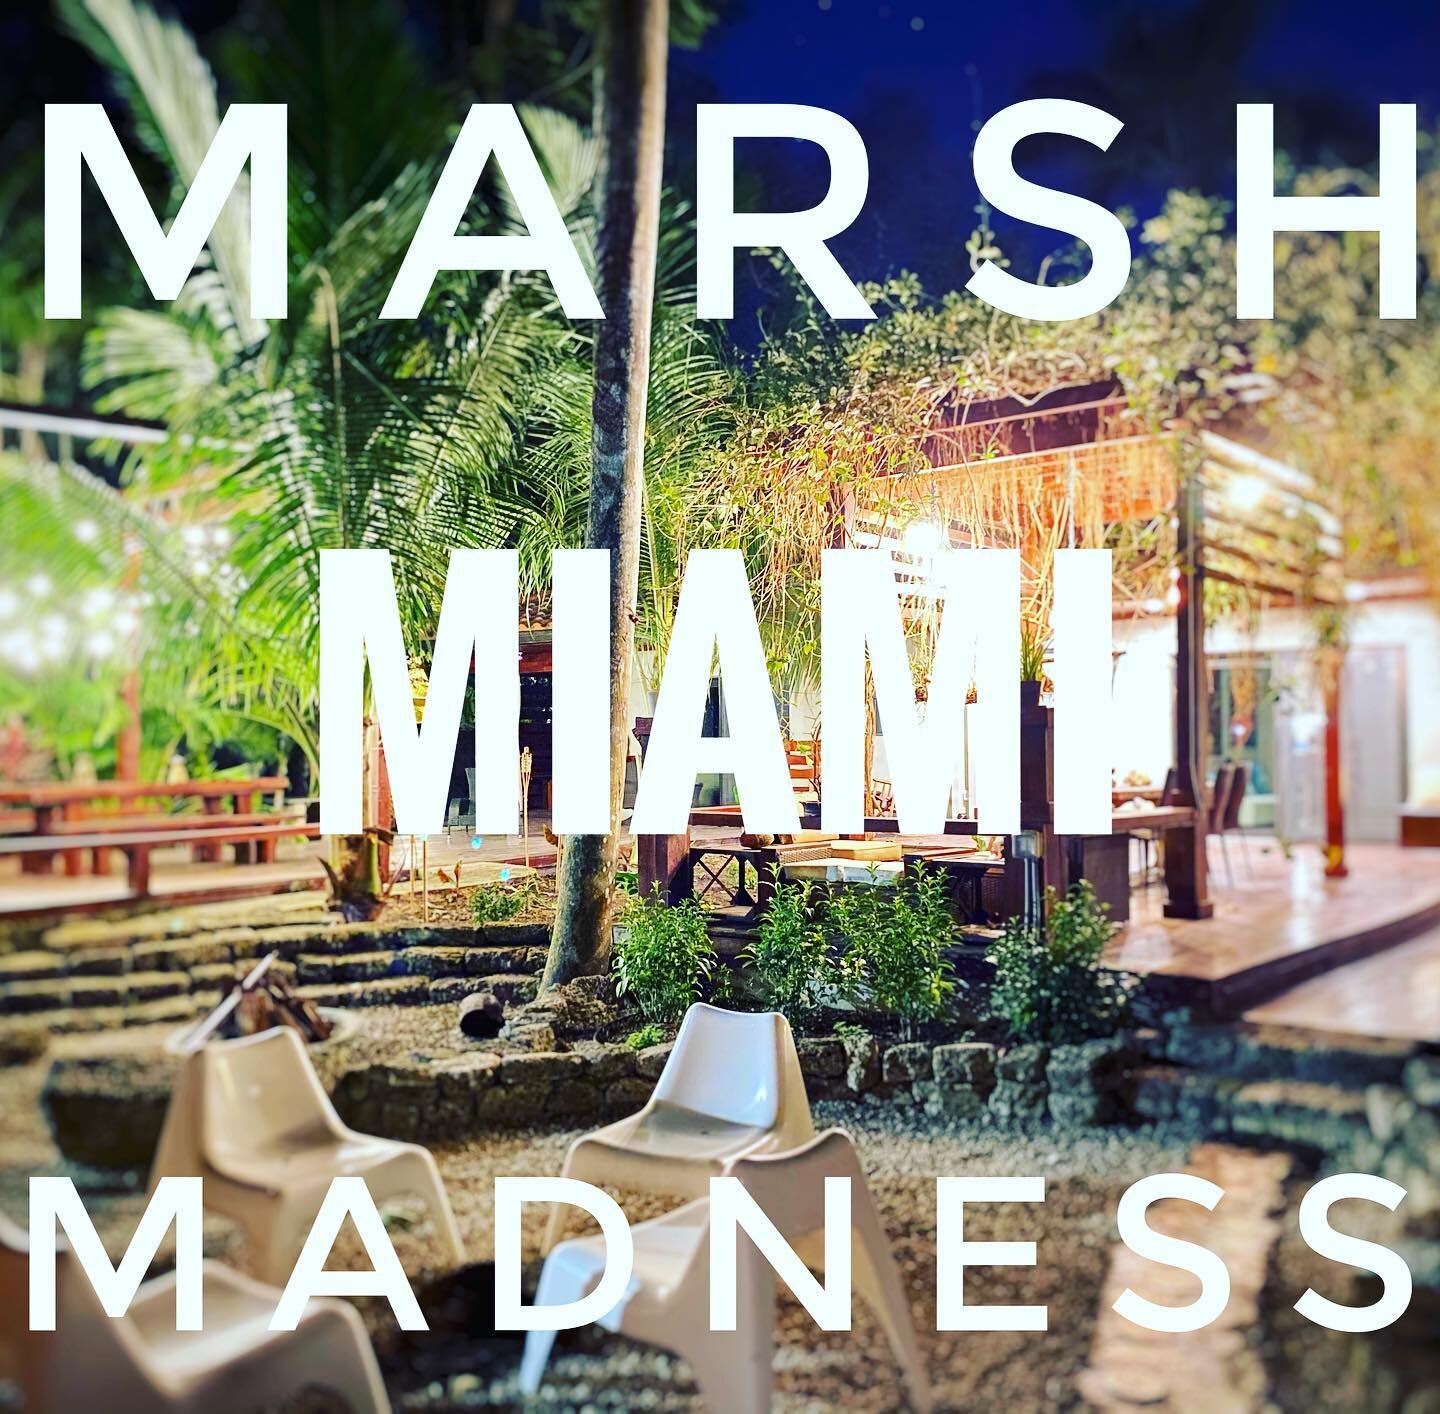 This Thurs. 3.18. Miami. 6:30pm. Seven courses of MARINE CUISINE &amp; DelicaSEAS by Master Mermmelier @kevinjoseph. 
Paired with 7 fine wines as well. 

The second event of the series follows a magnificent kick-off on The Myakka River last Friday. O